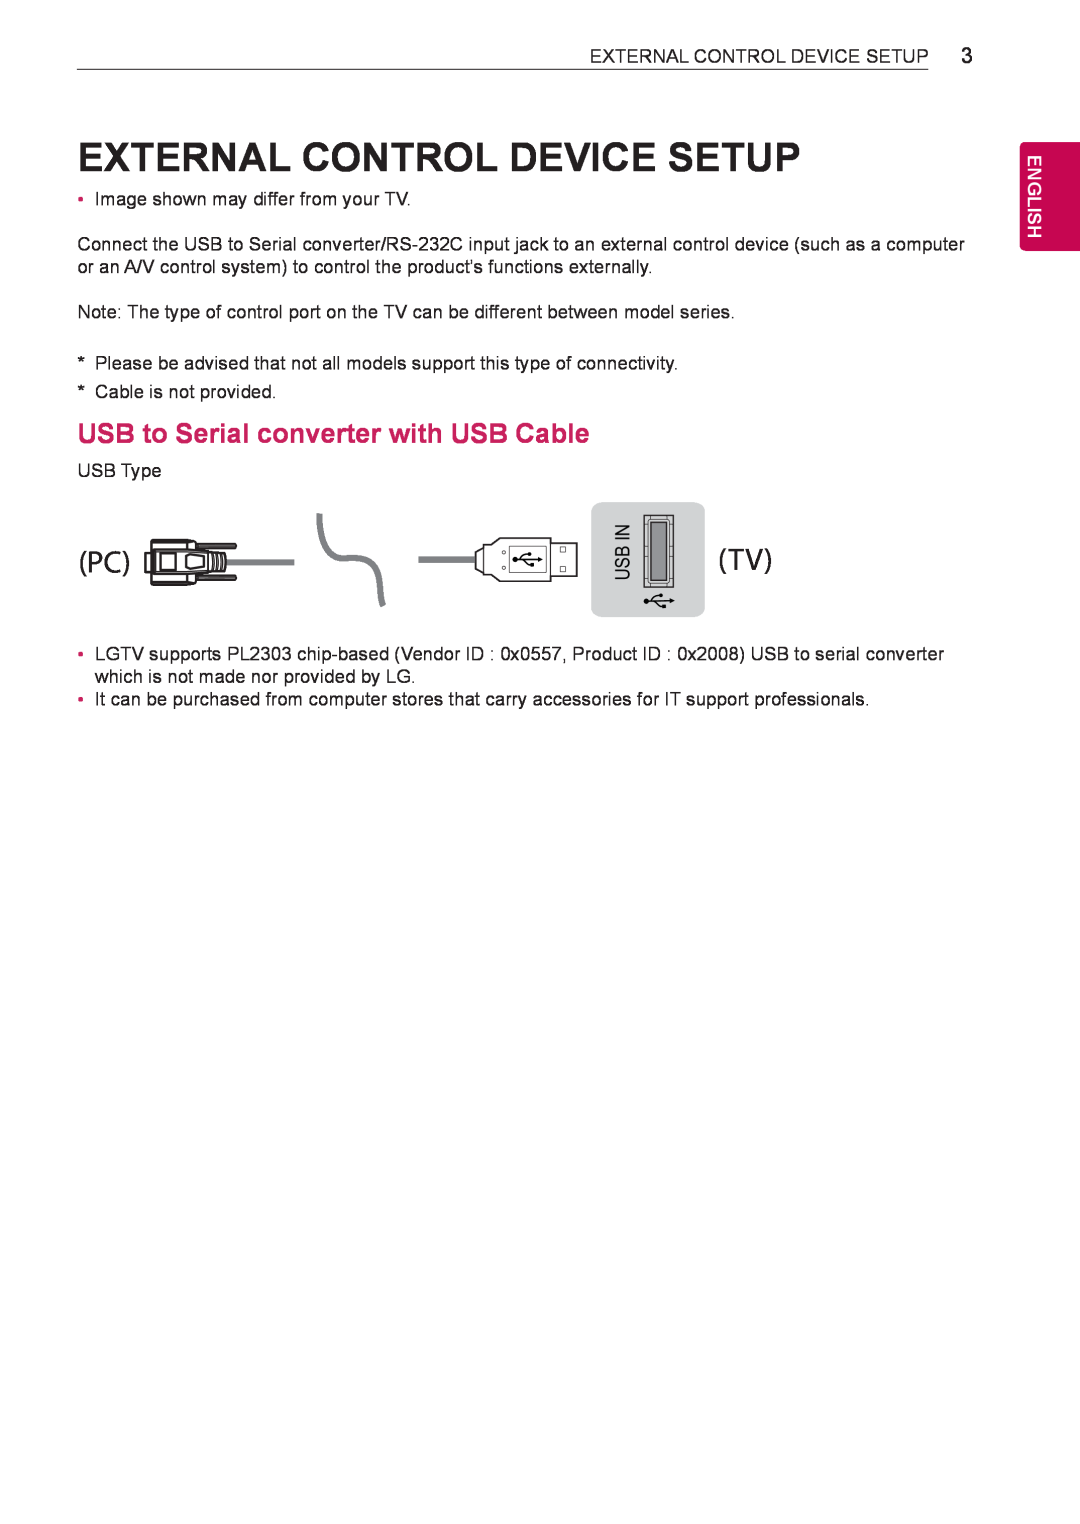 LG Electronics 60LN5400 owner manual External Control Device Setup, USB to Serial converter with USB Cable, English 